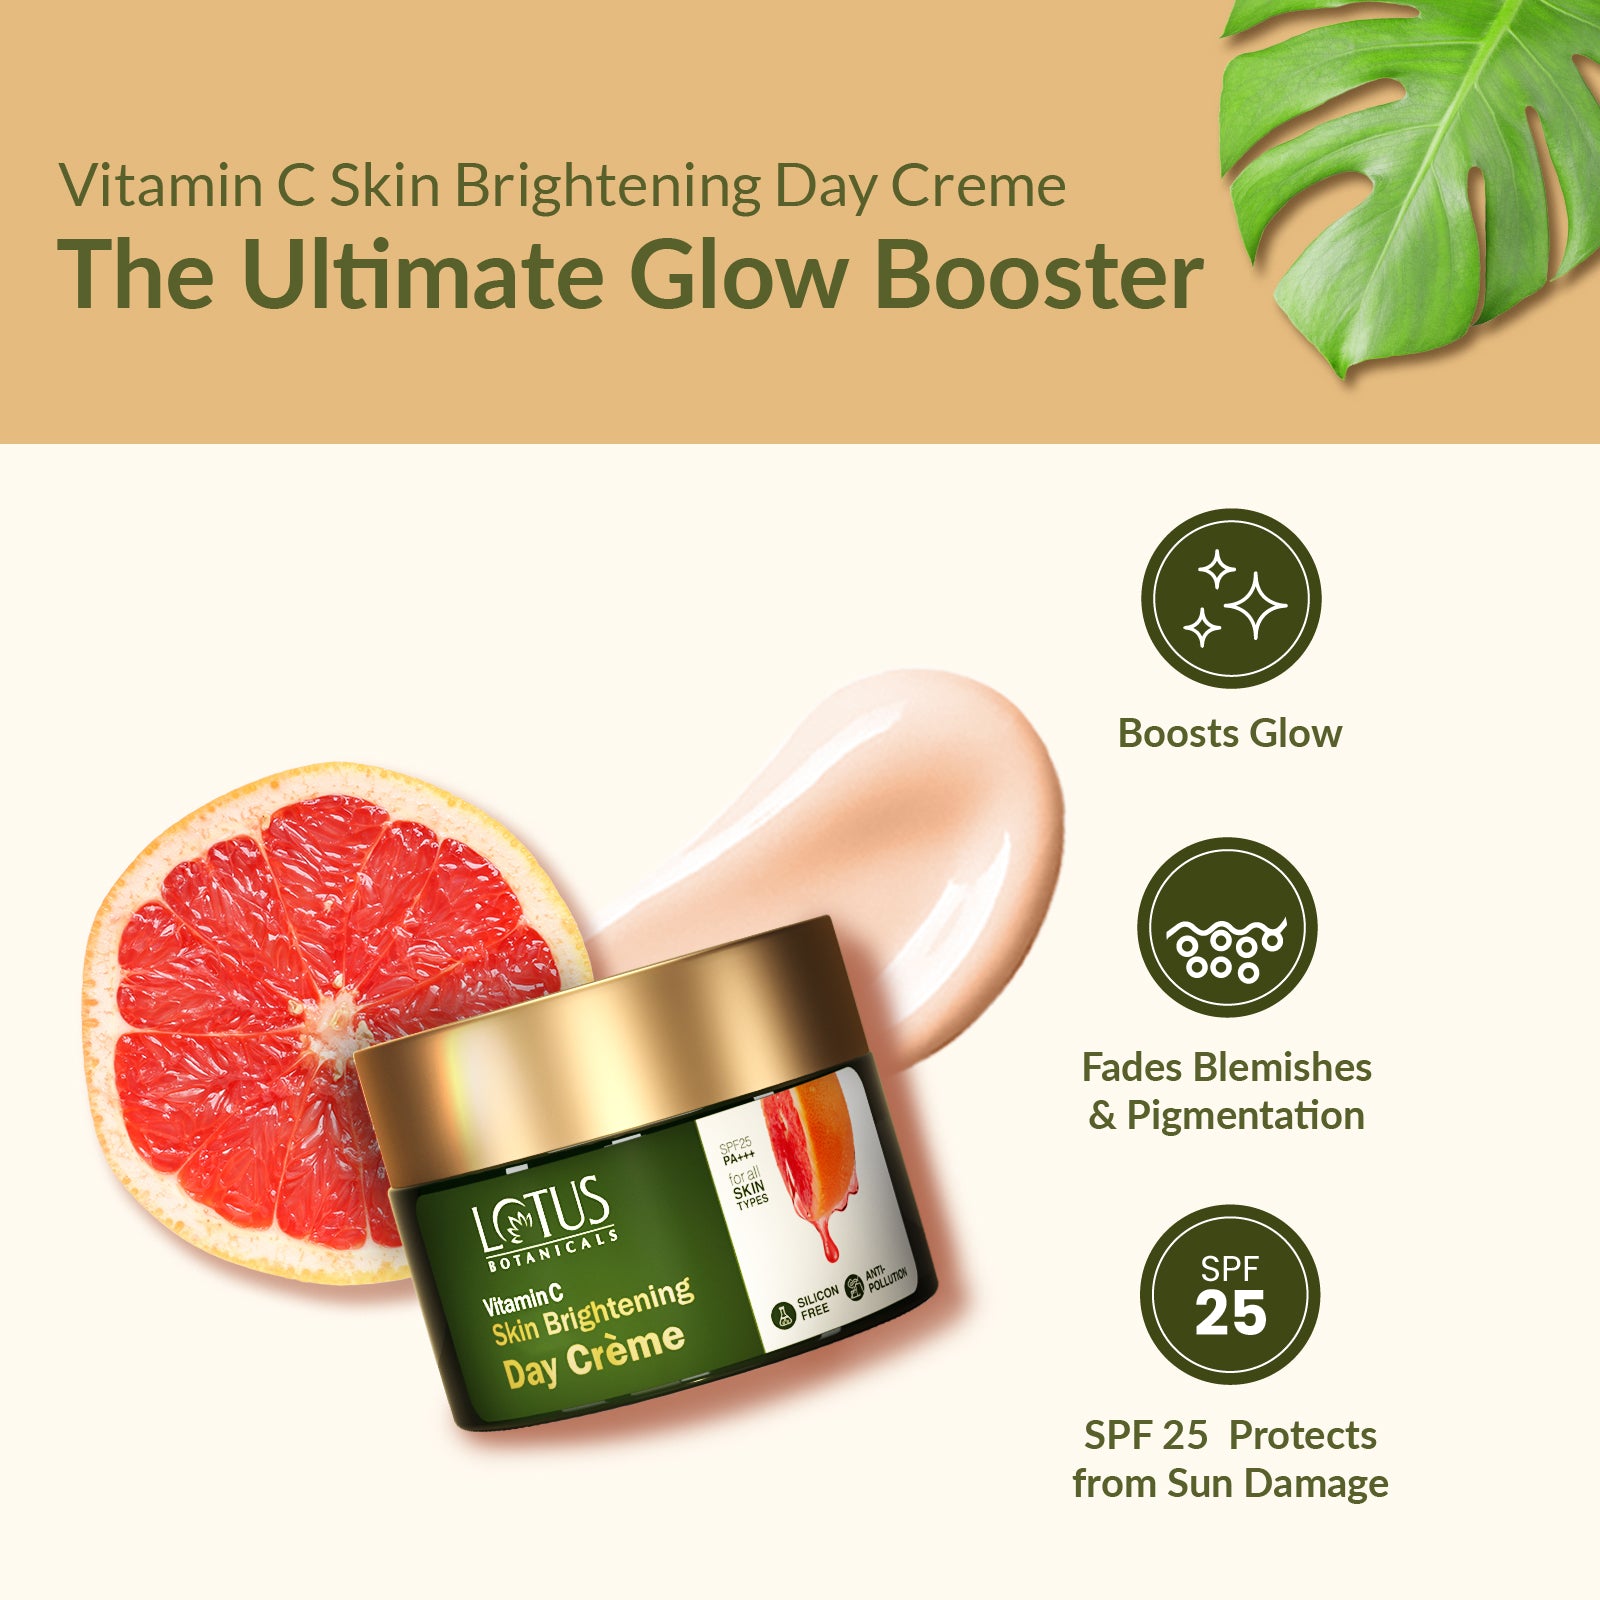 Vitamin C Skin Brightening Day Cr�me - Enhance your skin's radiance with this powerful Vitamin C-infused day cream